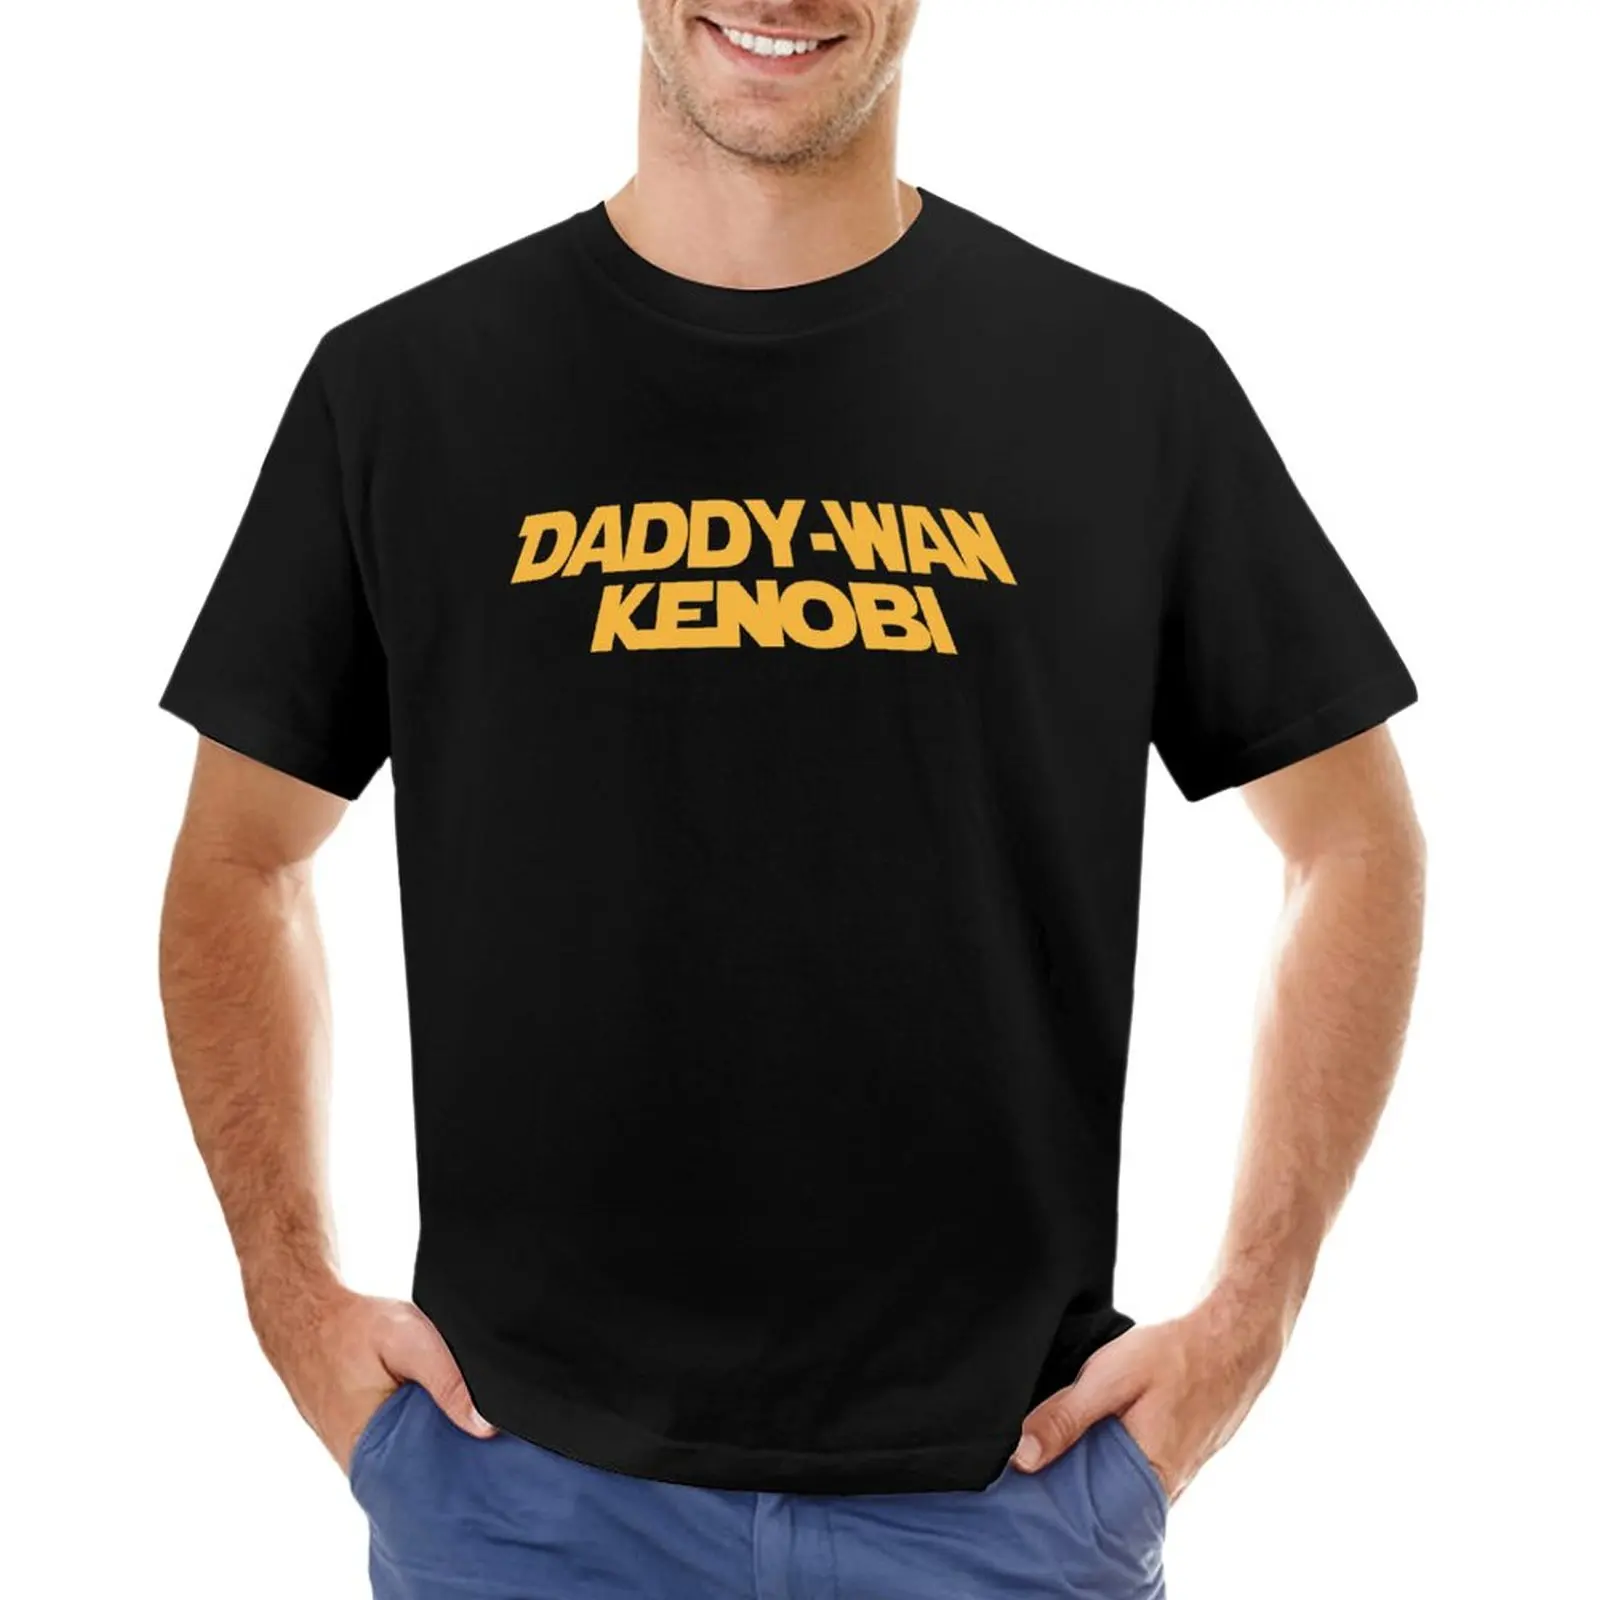 

Copy of Daddy-Wan T-Shirt heavyweight t shirts customized t shirts aesthetic clothes Tee shirt clothes for men